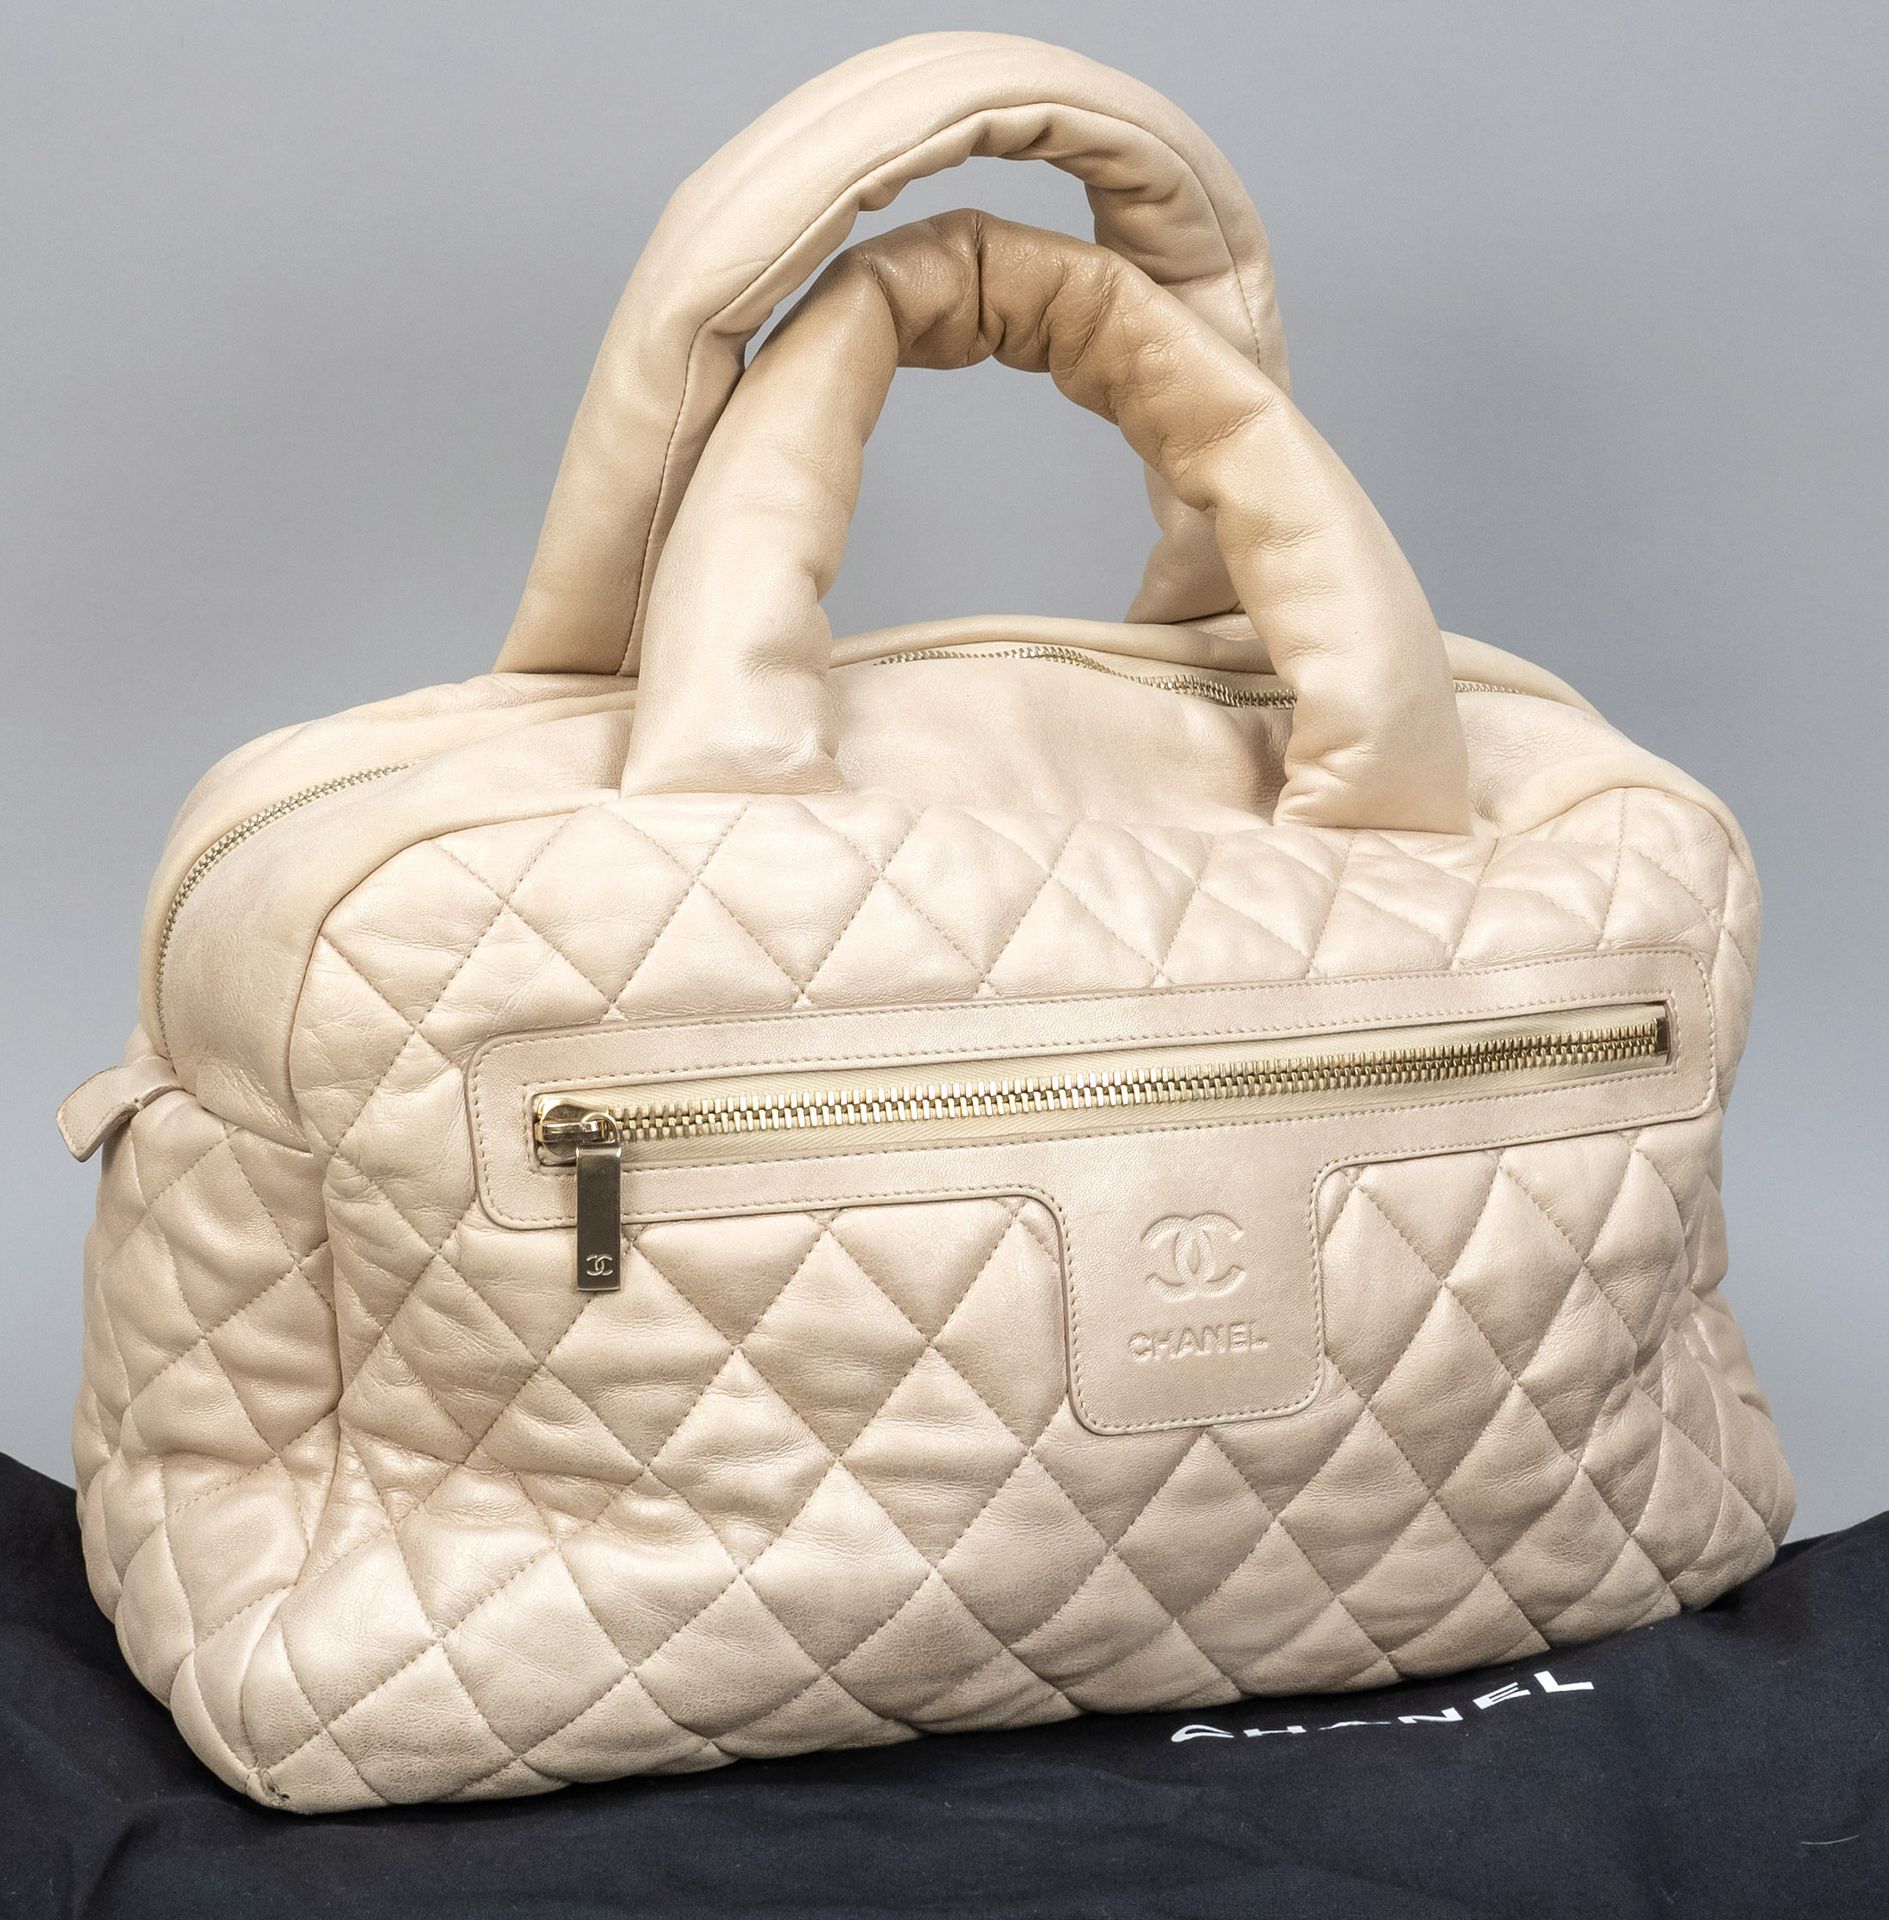 Chanel, Cocoon Bowler Gold Calfskin Leather Tote Bag, fi…